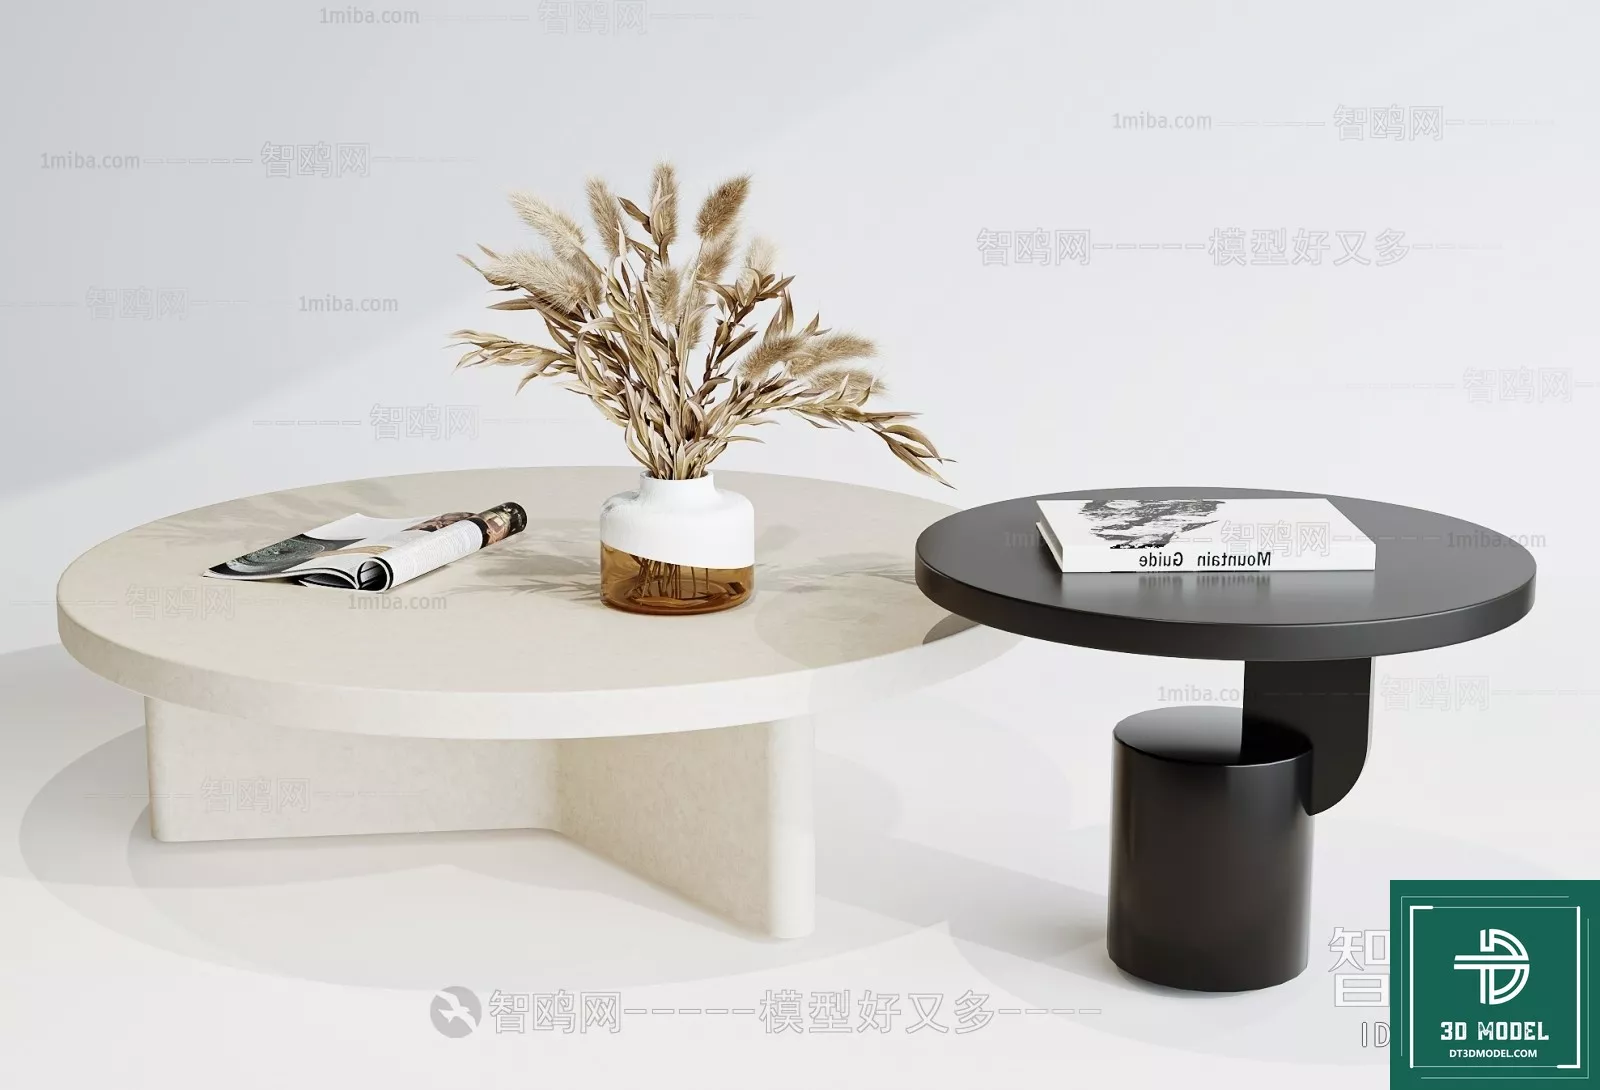 MODERN TEA TABLE - SKETCHUP 3D MODEL - VRAY OR ENSCAPE - ID14943